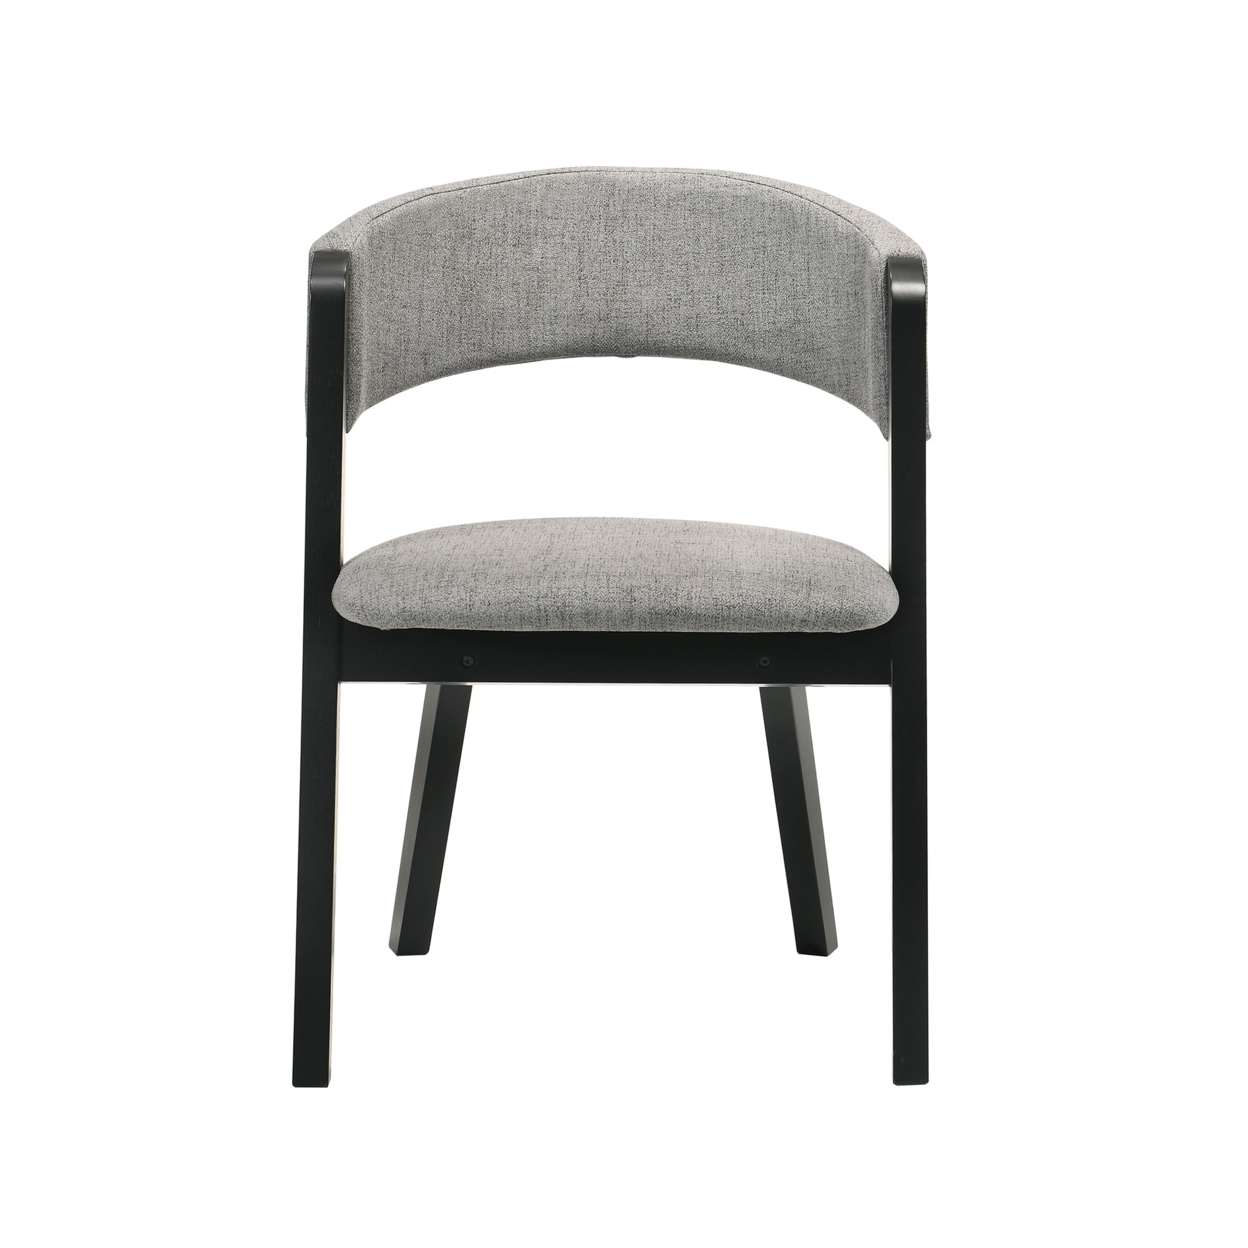 Fabric Upholstered Round Back Wood Dining Chair, Set Of 2, Black And Gray- Saltoro Sherpi